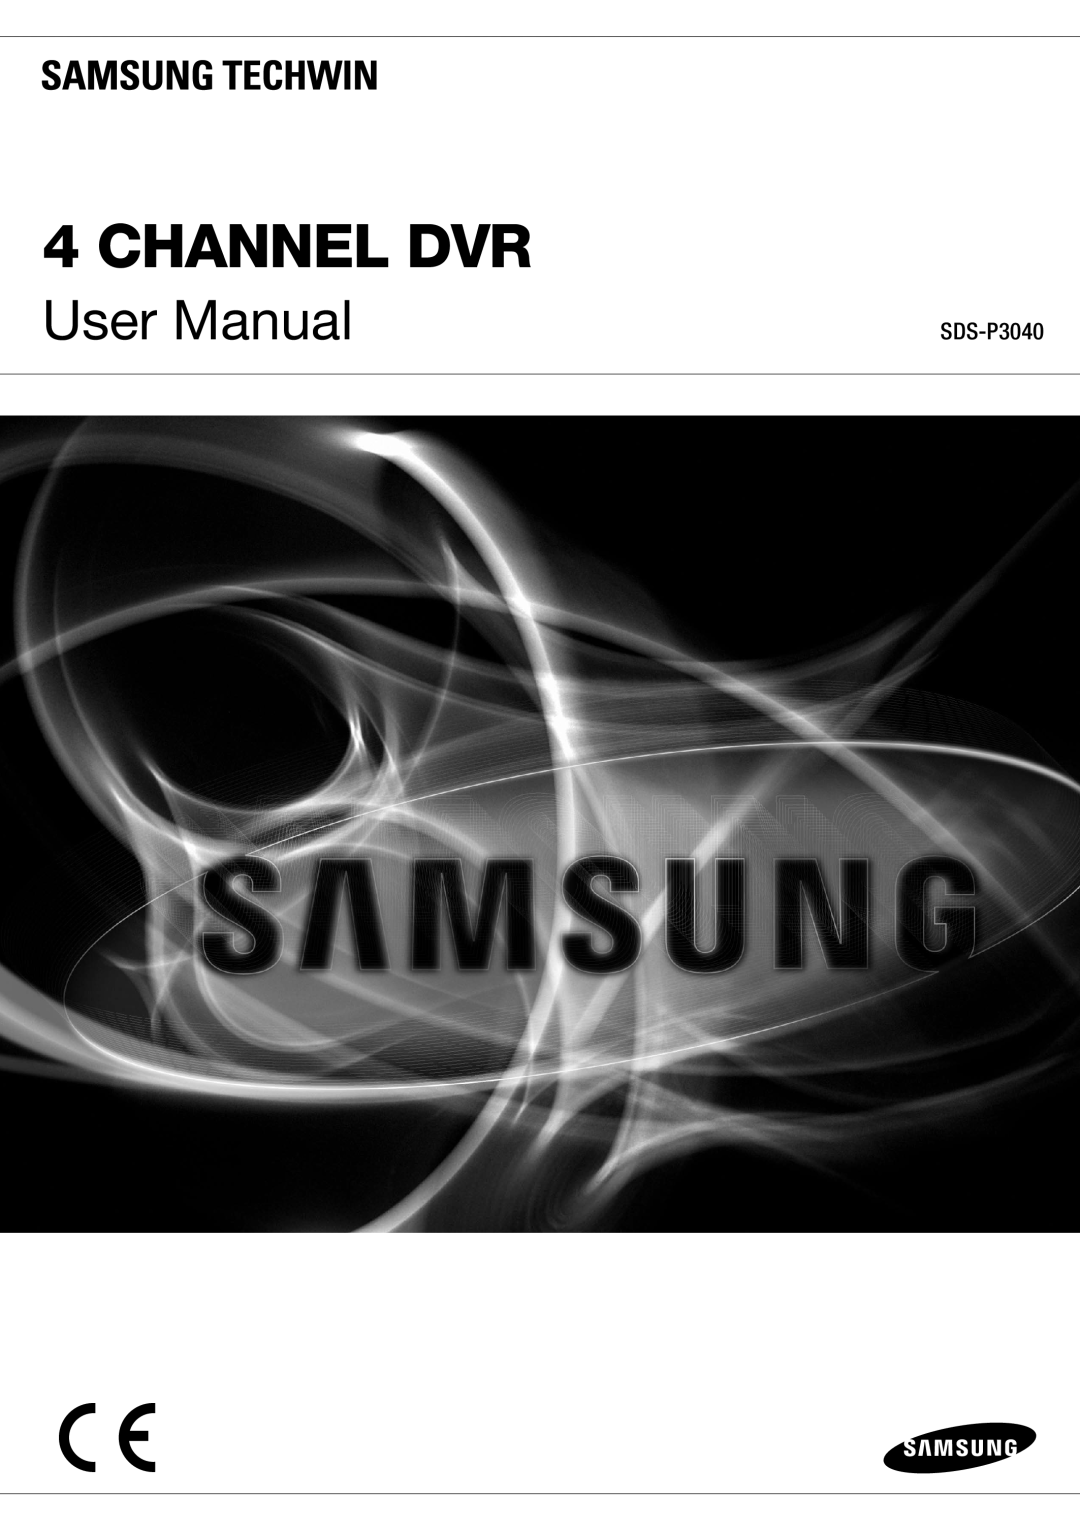 Samsung SDR3100, SDSV3040 manual Channel DVR security system, For your safety, SDS-P3040, All-In-OneSecurity Kits, Camera 